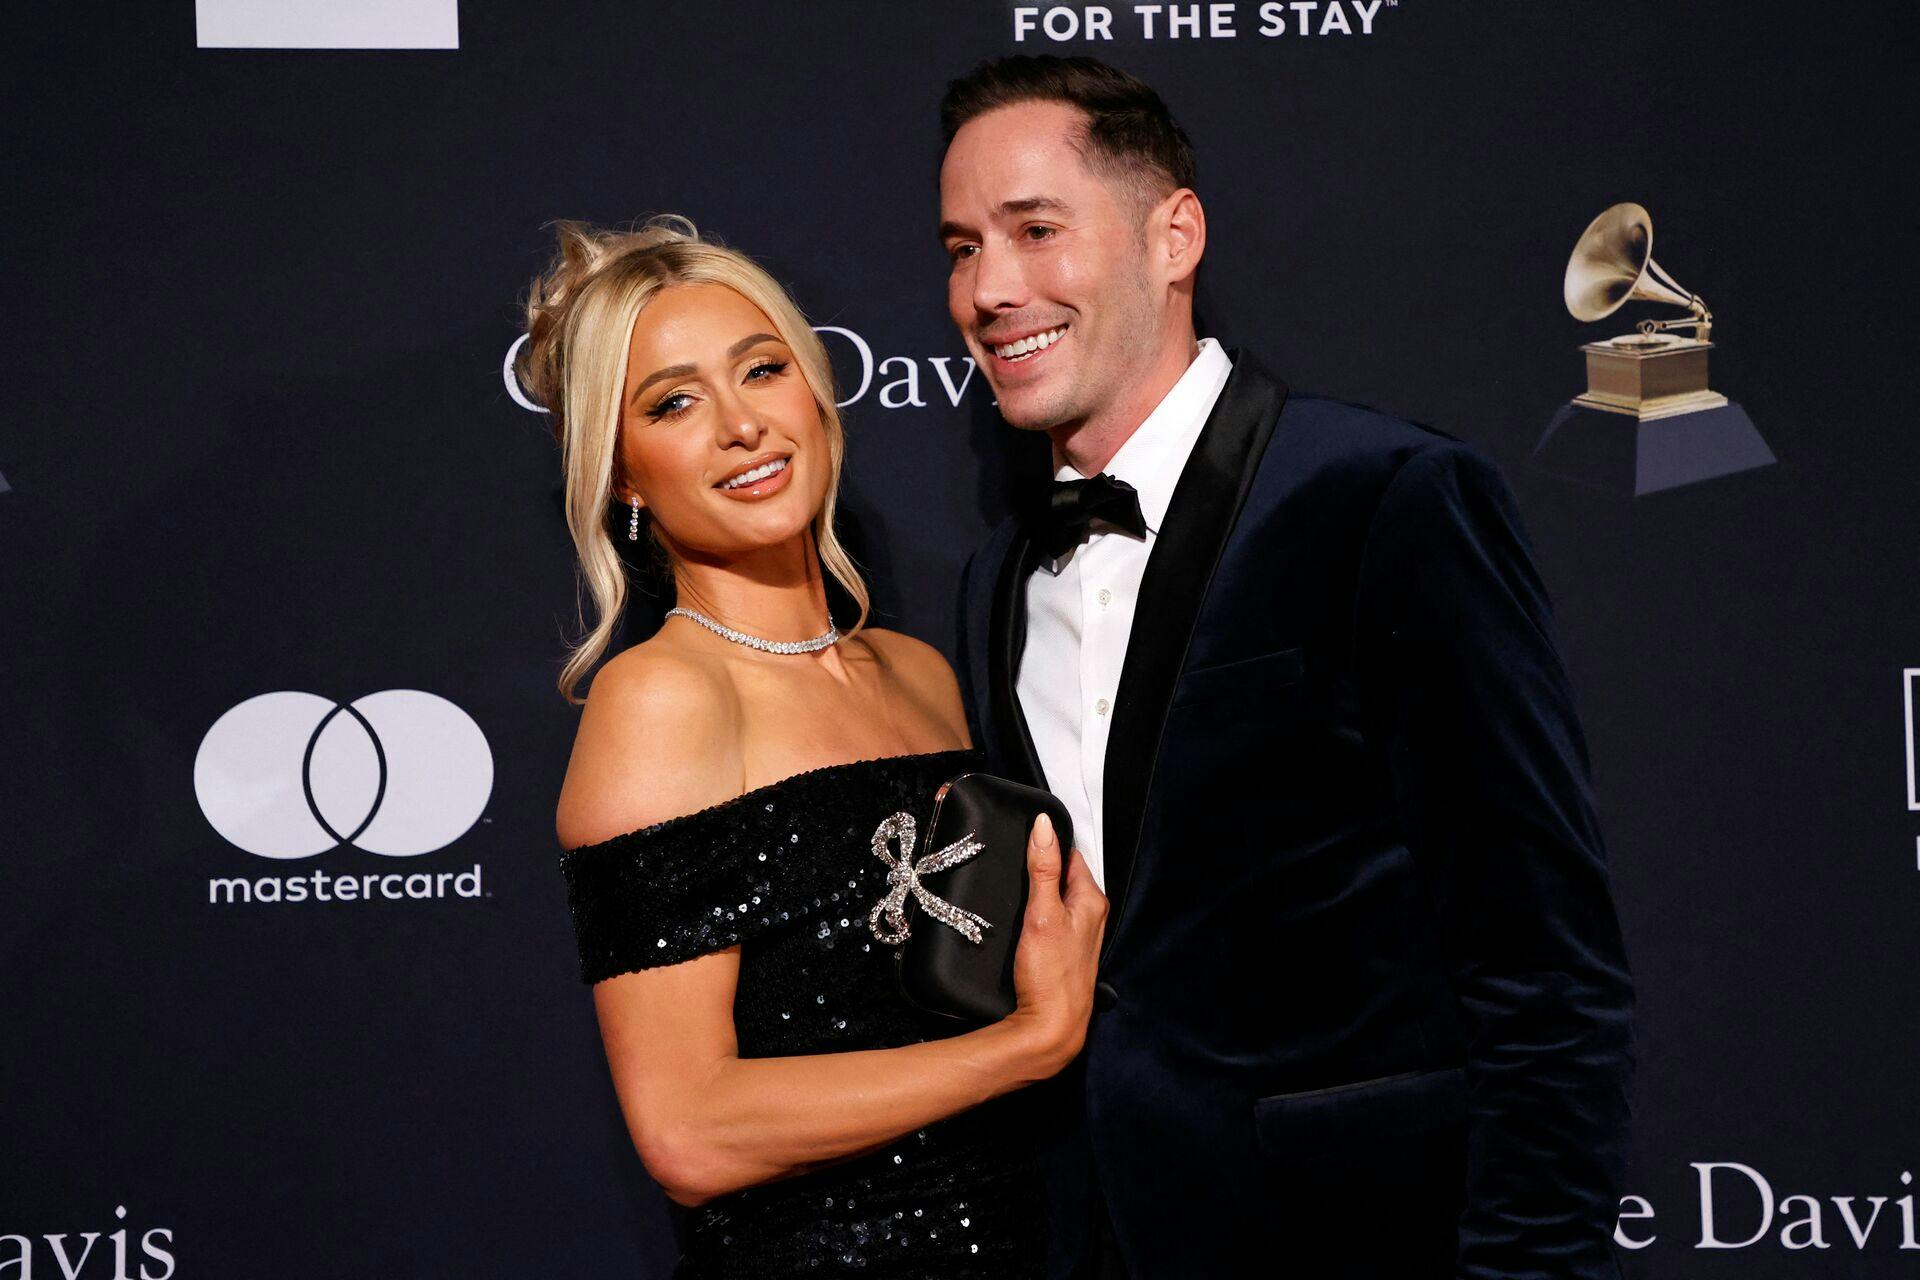 US socialite Paris Hilton (L) and husband US author Carter Reum arrive for the Recording Academy and Clive Davis pre-Grammy gala at the Beverly Hilton hotel in Beverly Hills, California on February 4, 2023. (Photo by Michael TRAN / AFP)